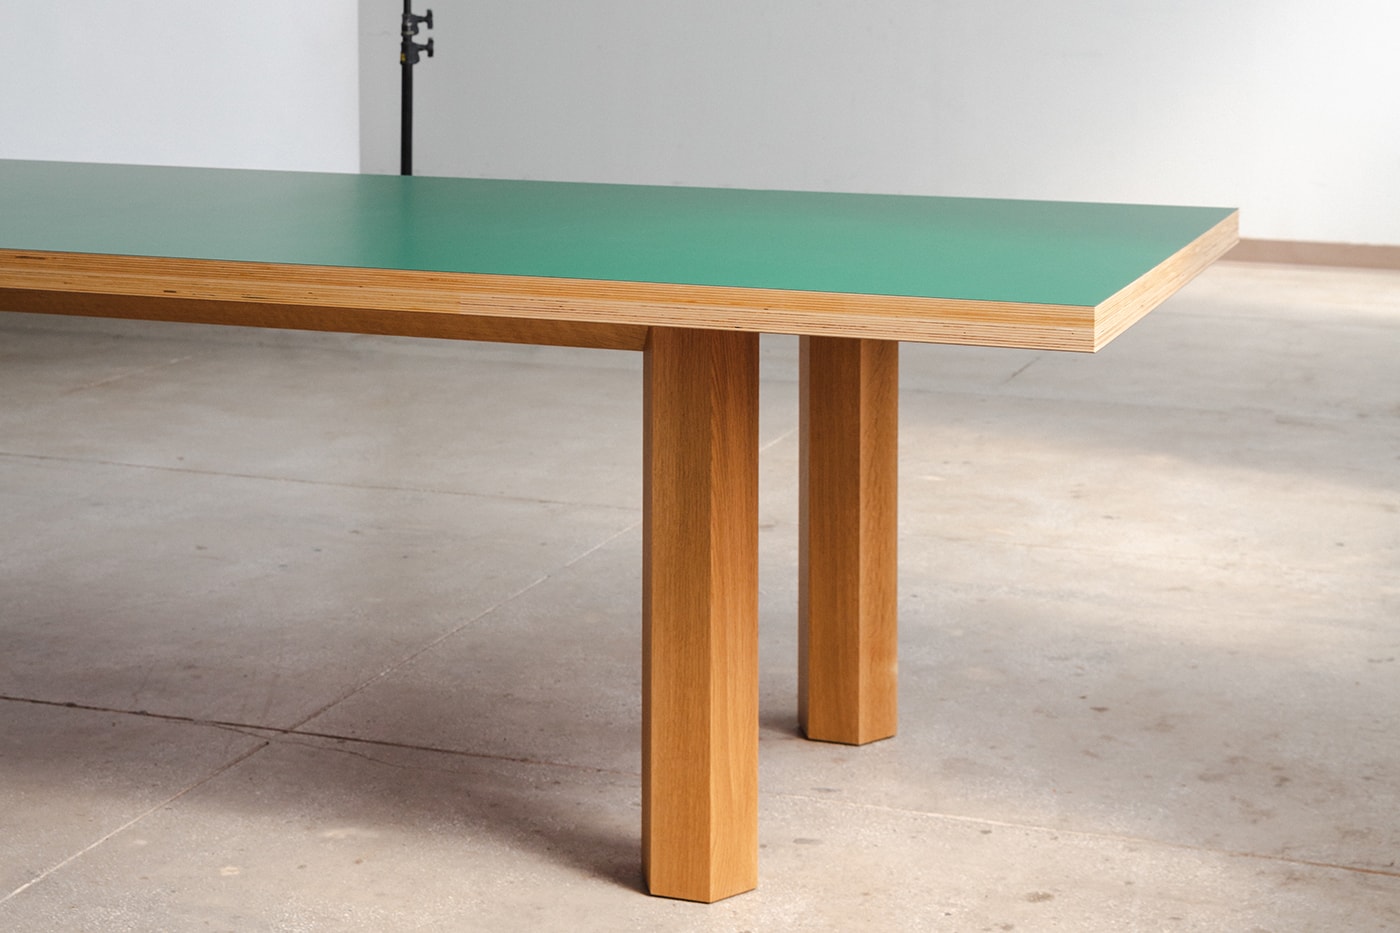 GRT Architects Prioritise Simple Colour with 'Poole Table' Collection Thomas Henry Poole